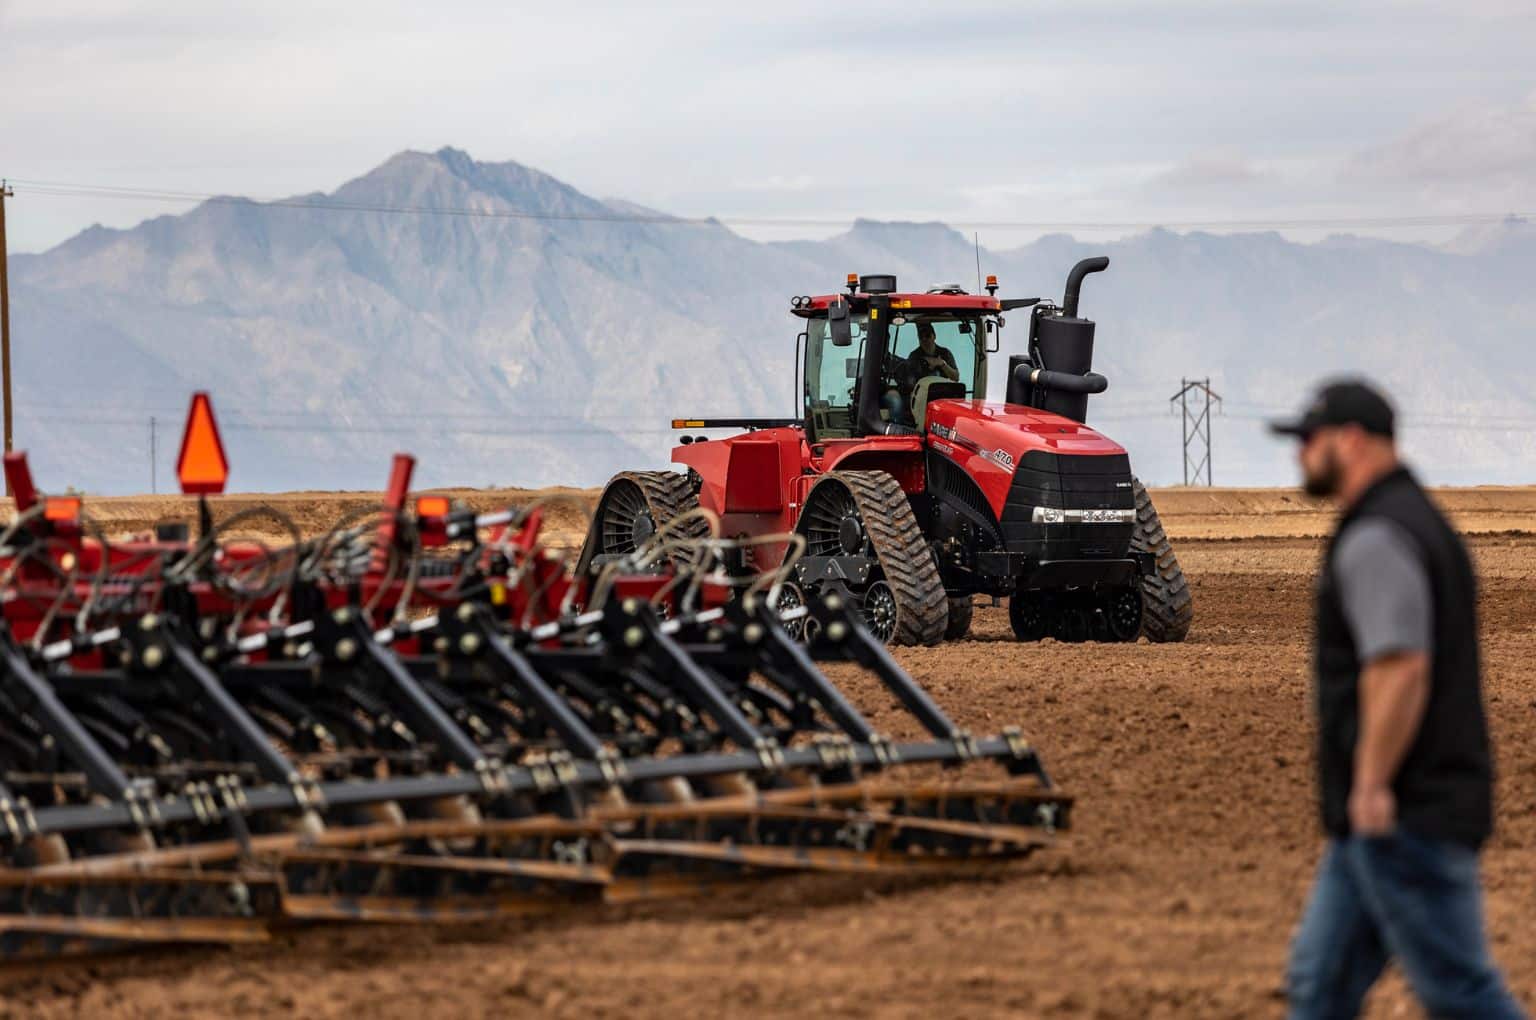 Case IH's vision on autonomy and automation